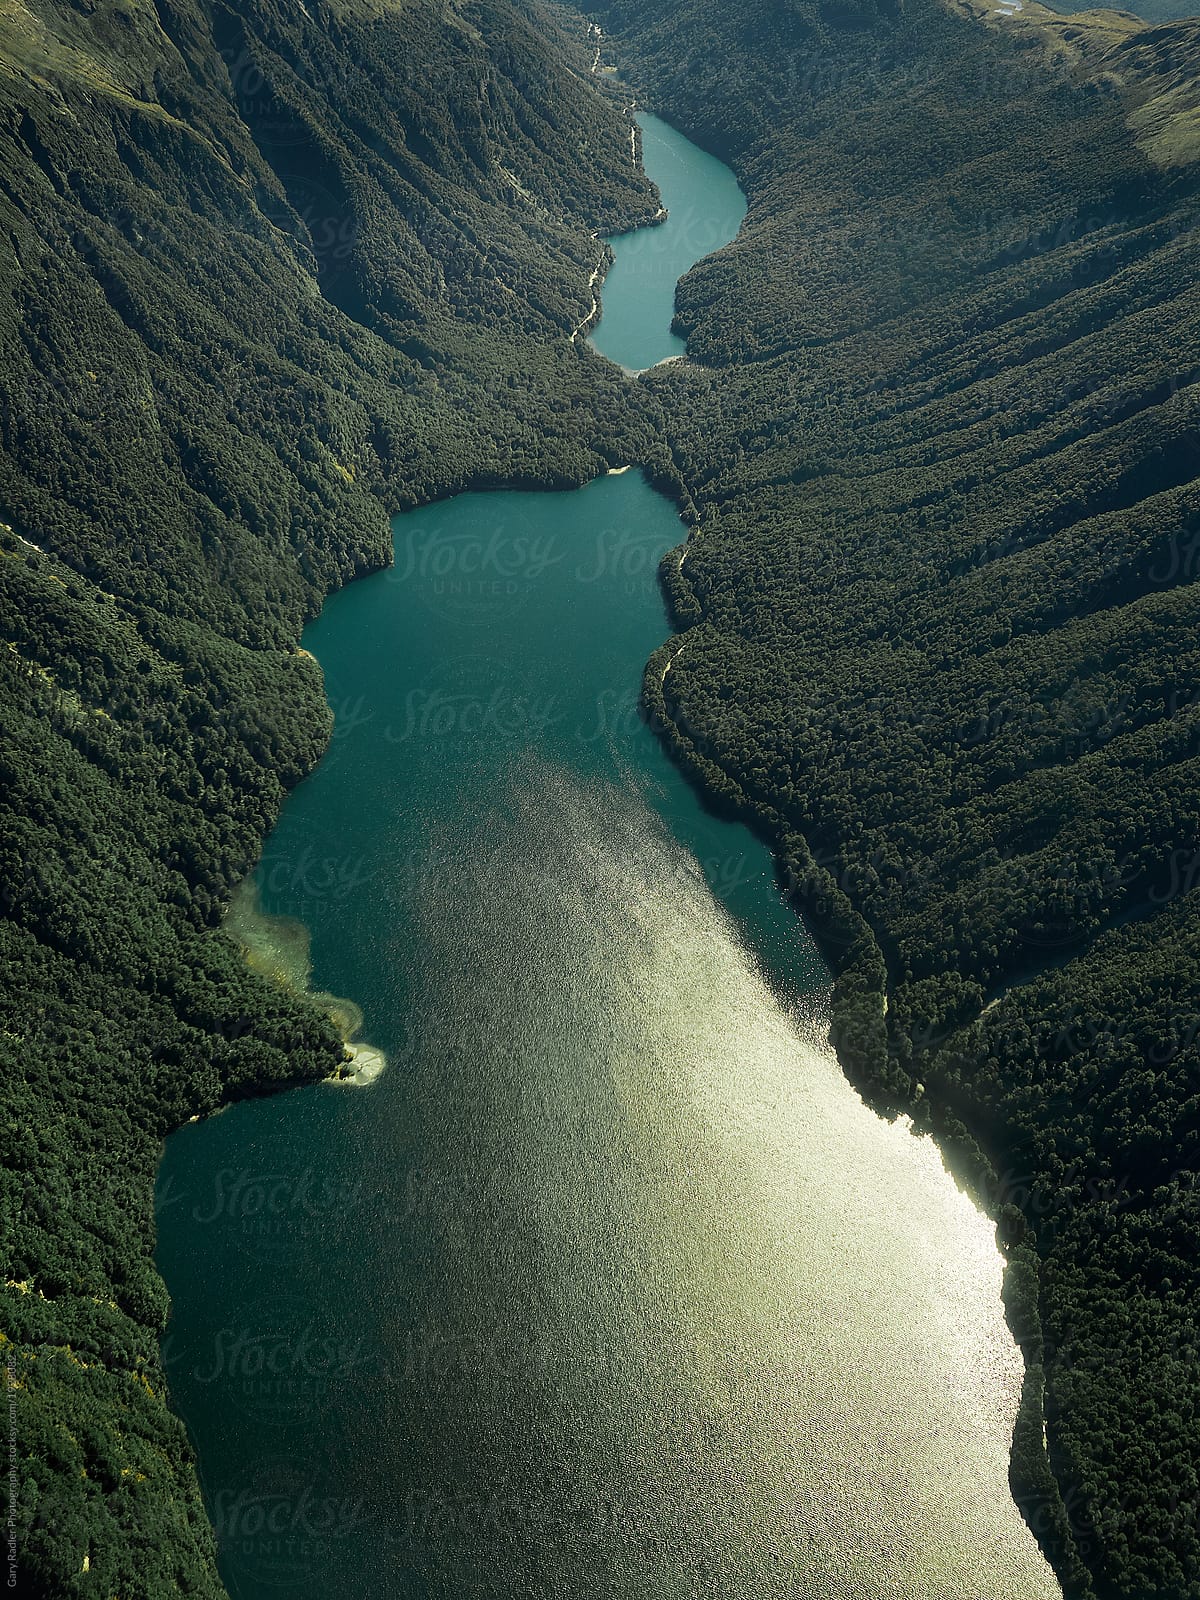 Lake at Base of Mountains on the South Island of New Zealand